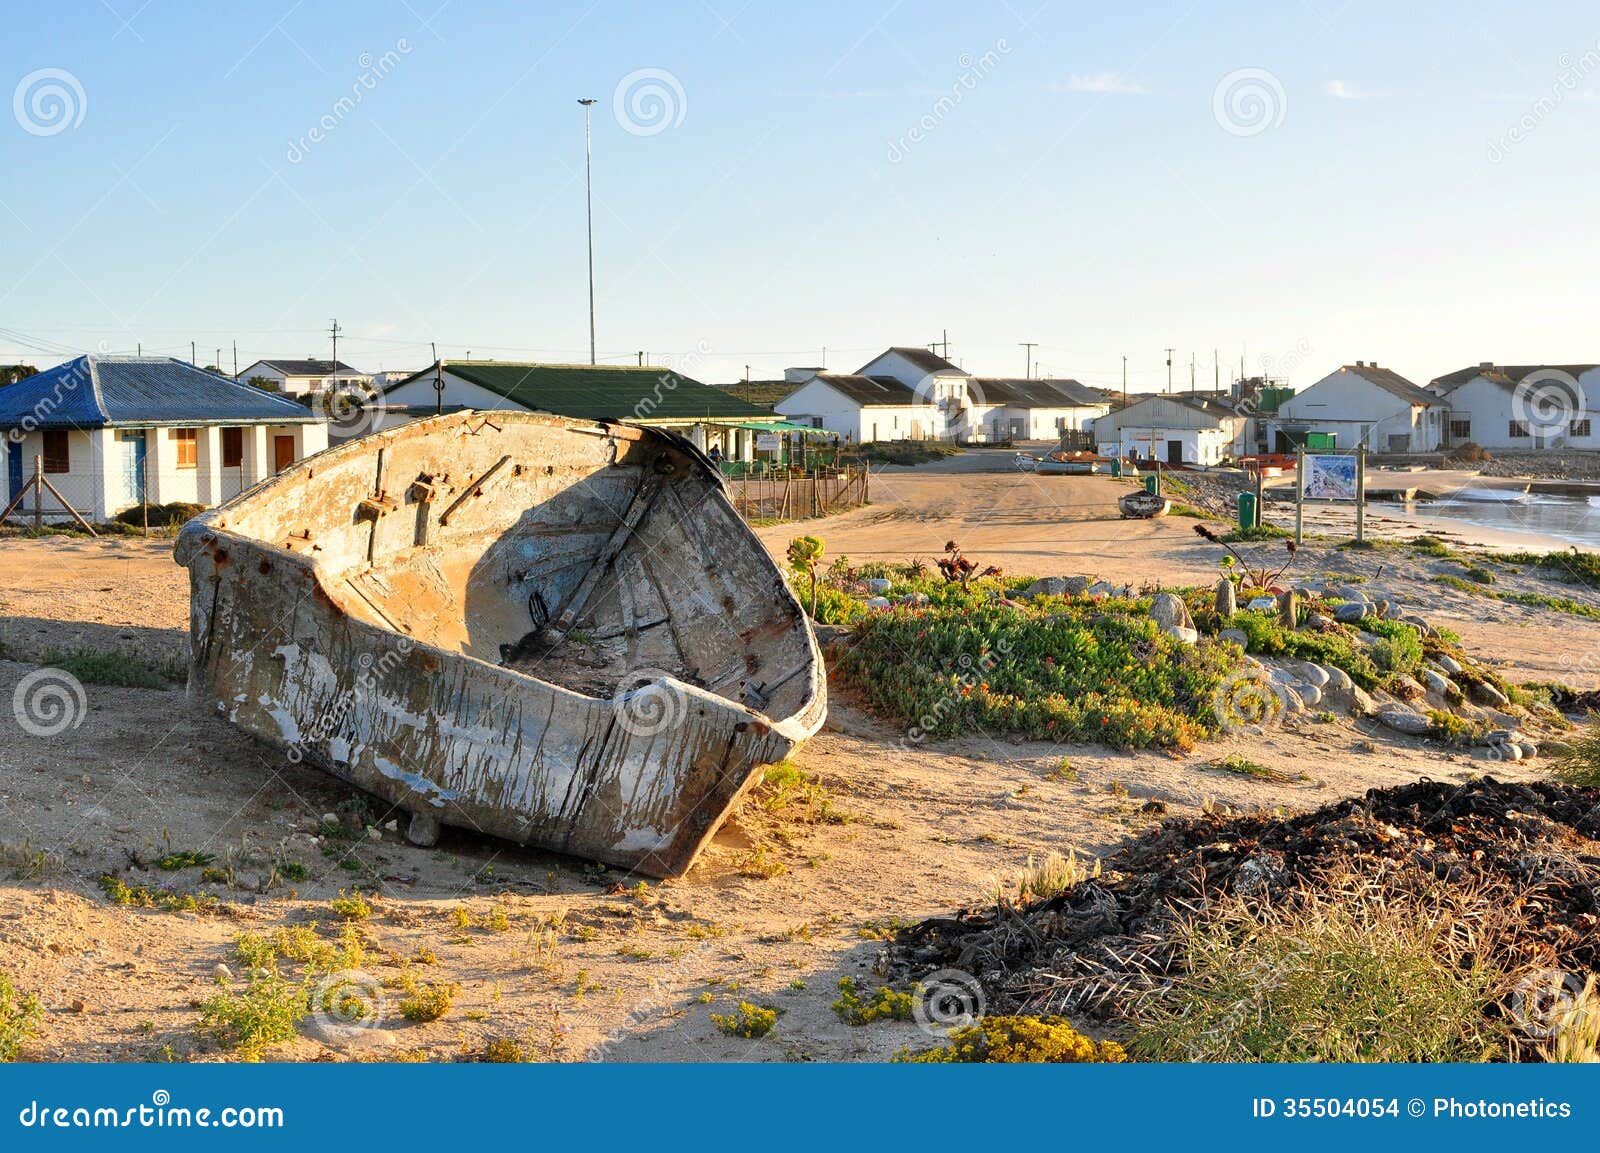 Fishing Boat With Fishing Village In Background Stock 